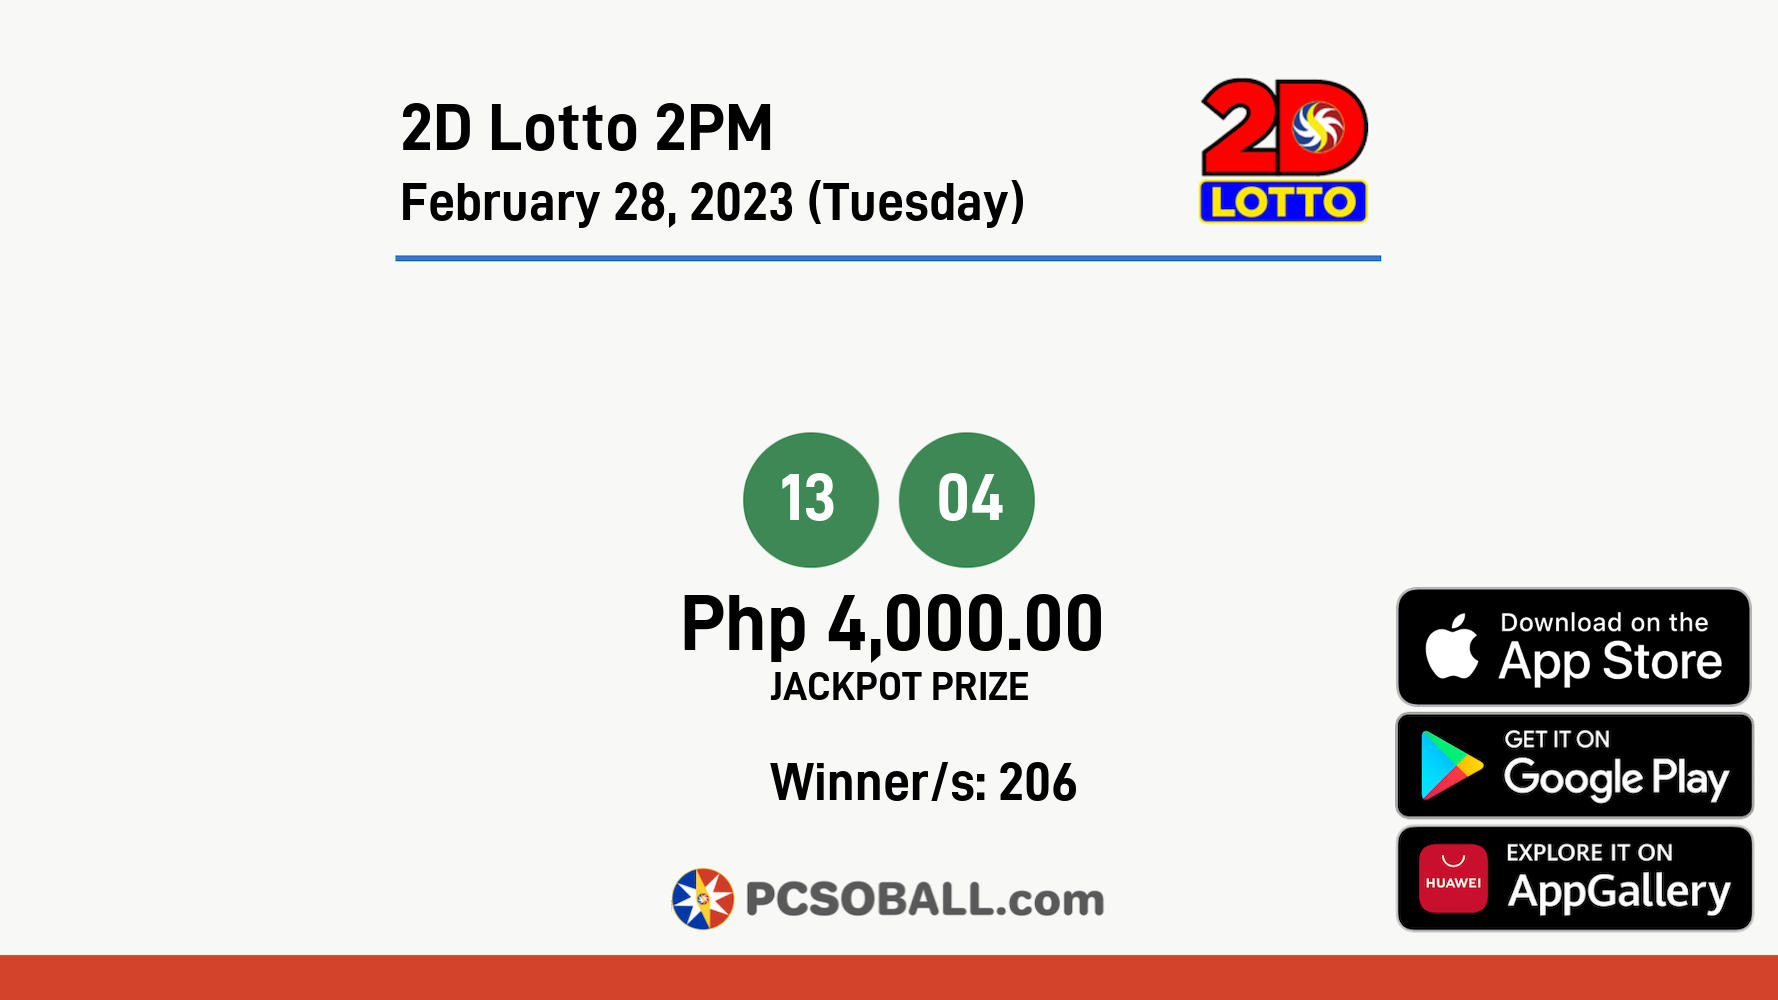 2D Lotto 2PM February 28, 2023 (Tuesday) Result